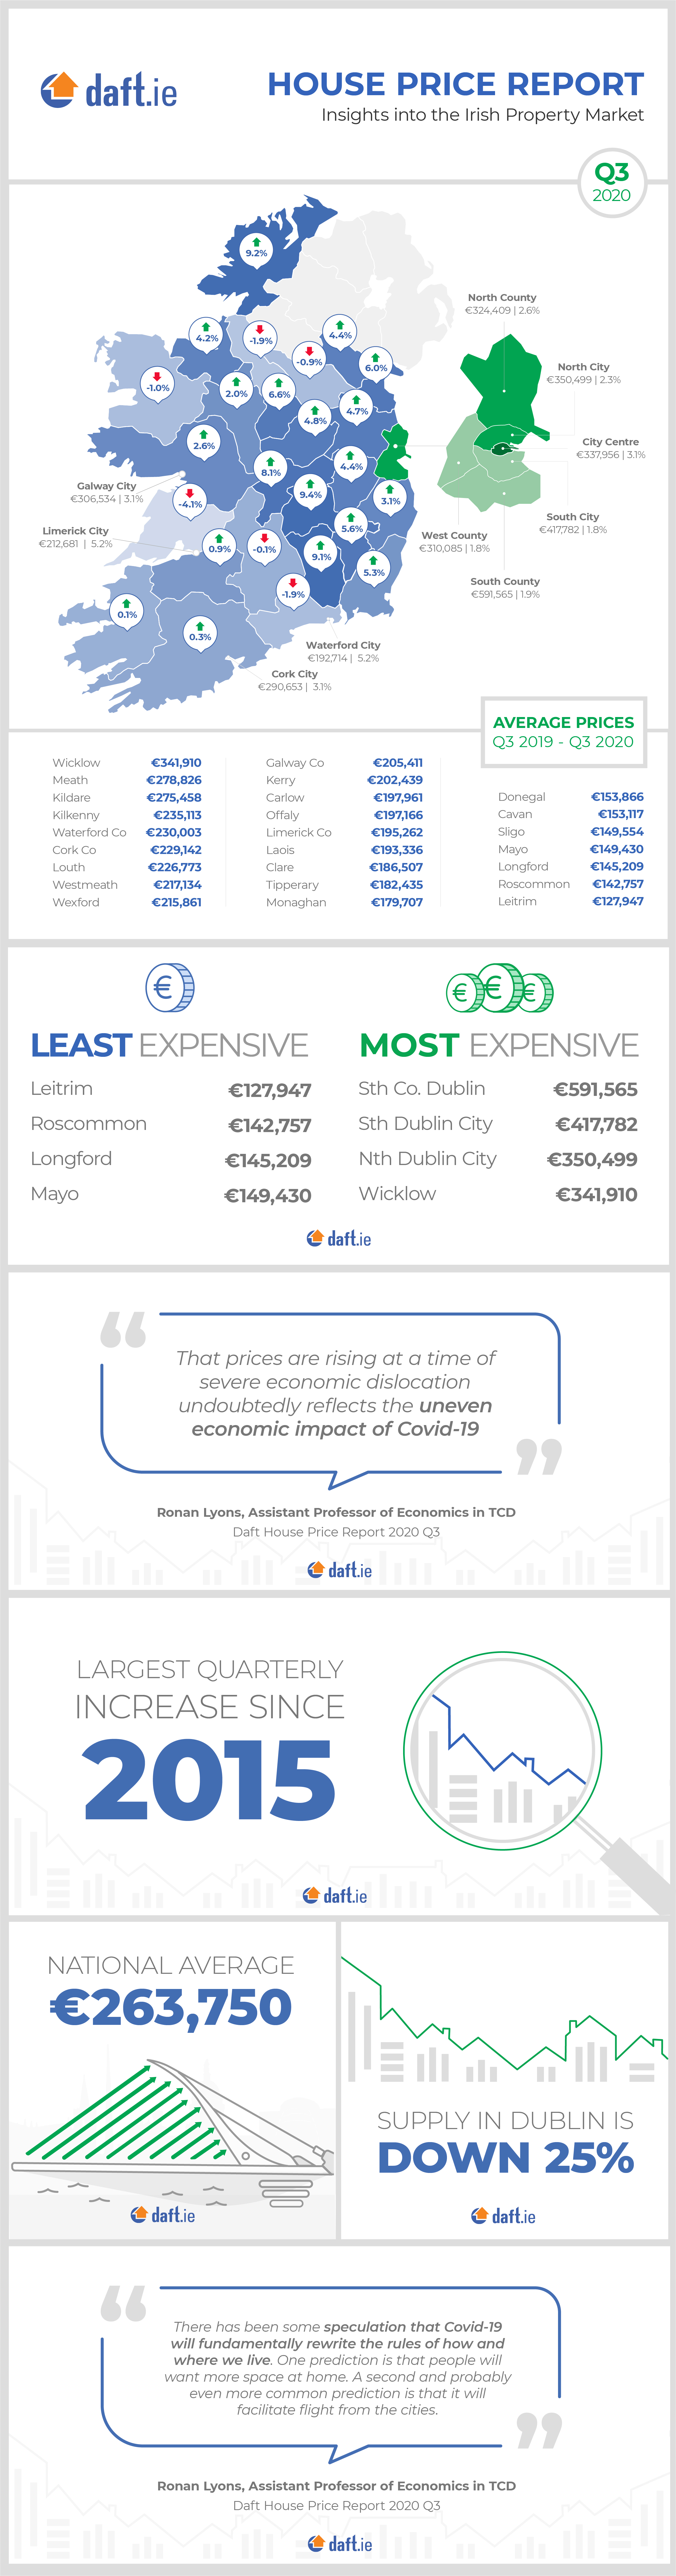 Daft.ie House Price Report: Q3 2020 Infographic